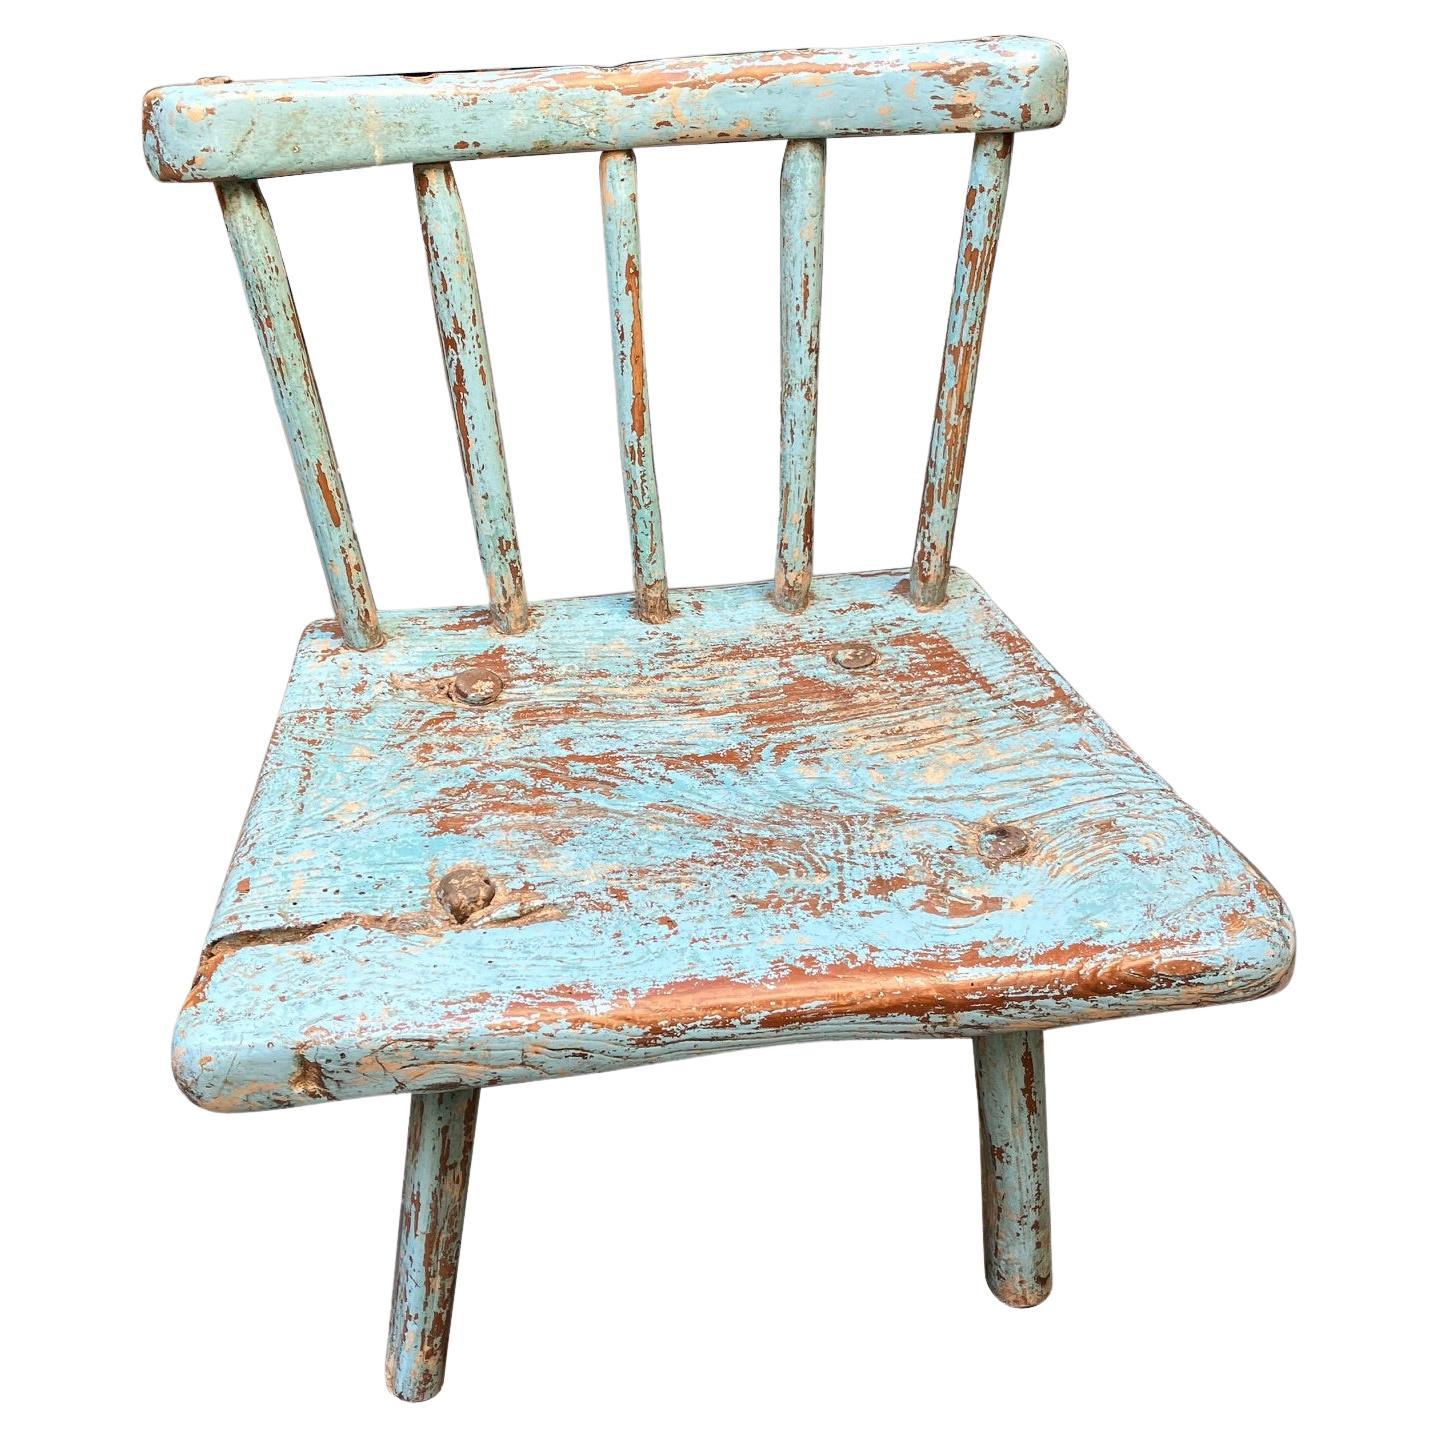 Charming English Rustic Windsor Child's Chair in Old Blue Paint